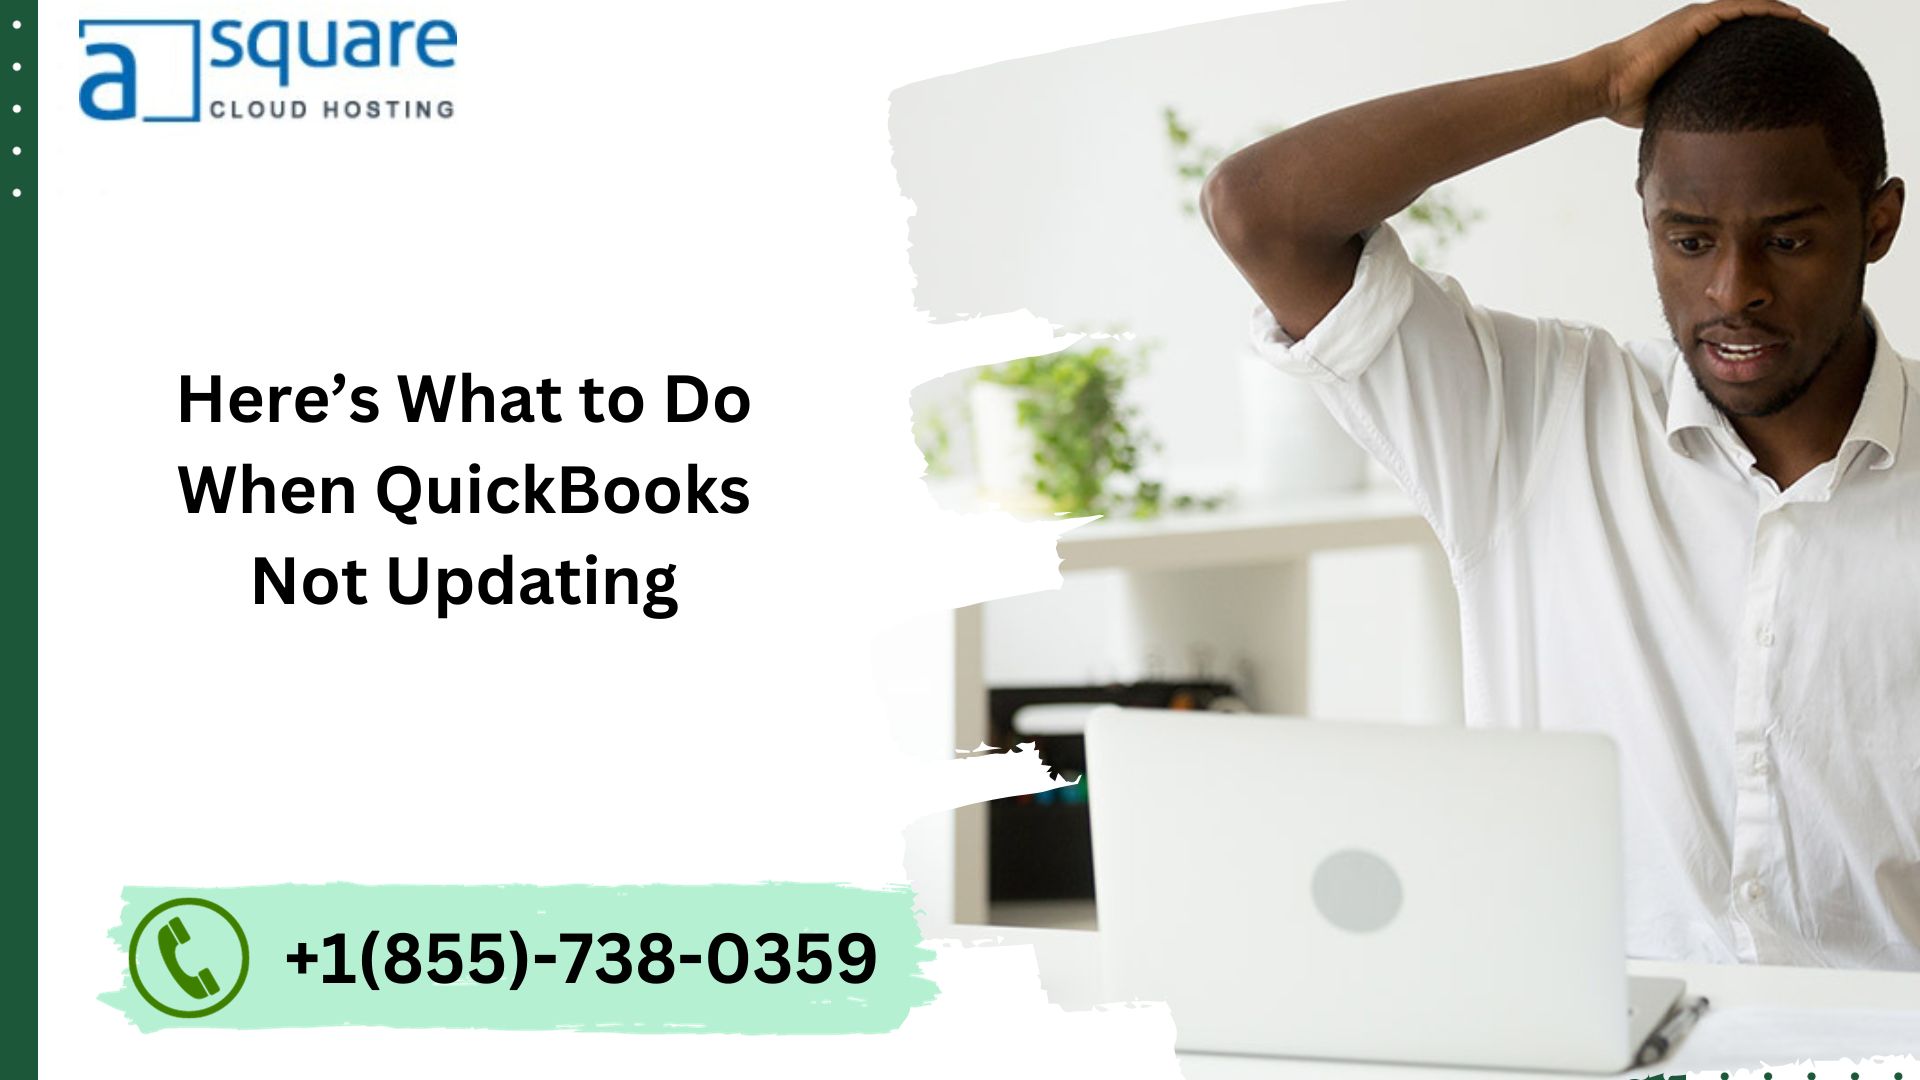 Here’s What to Do When QuickBooks Not Updating